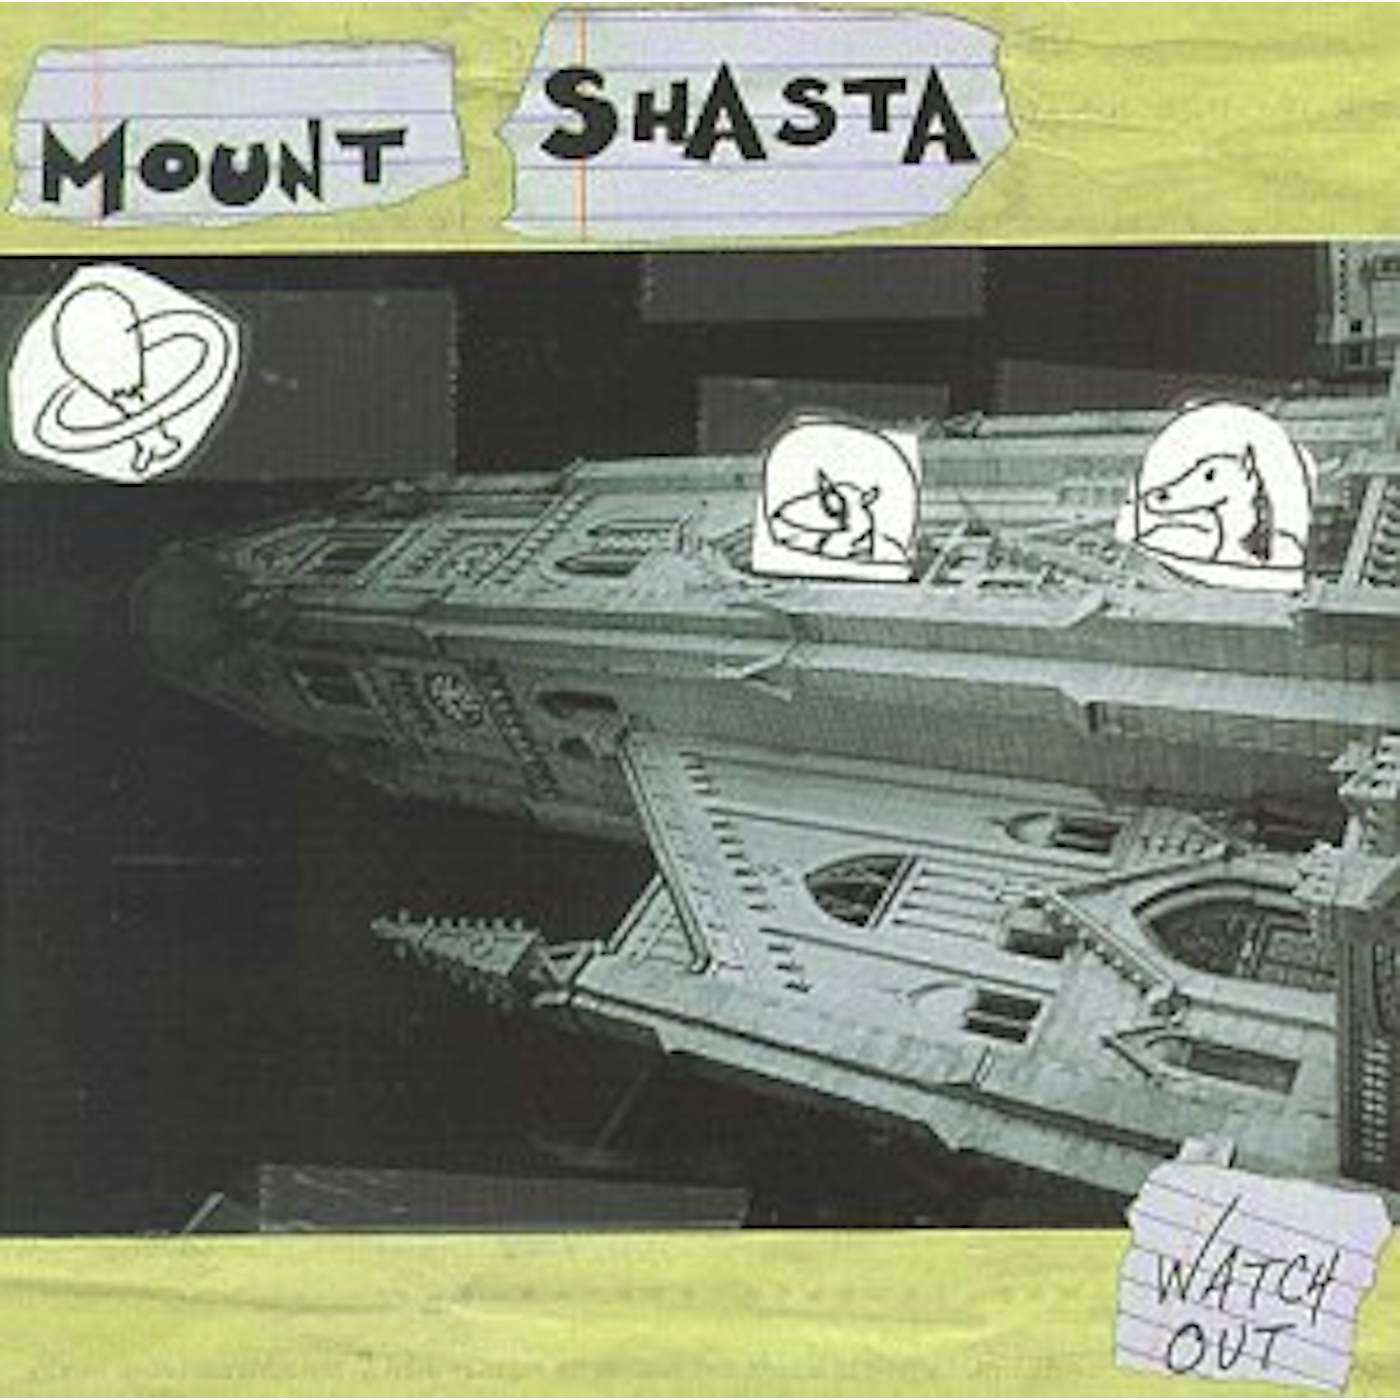 Mount Shasta WATCH OUT CD